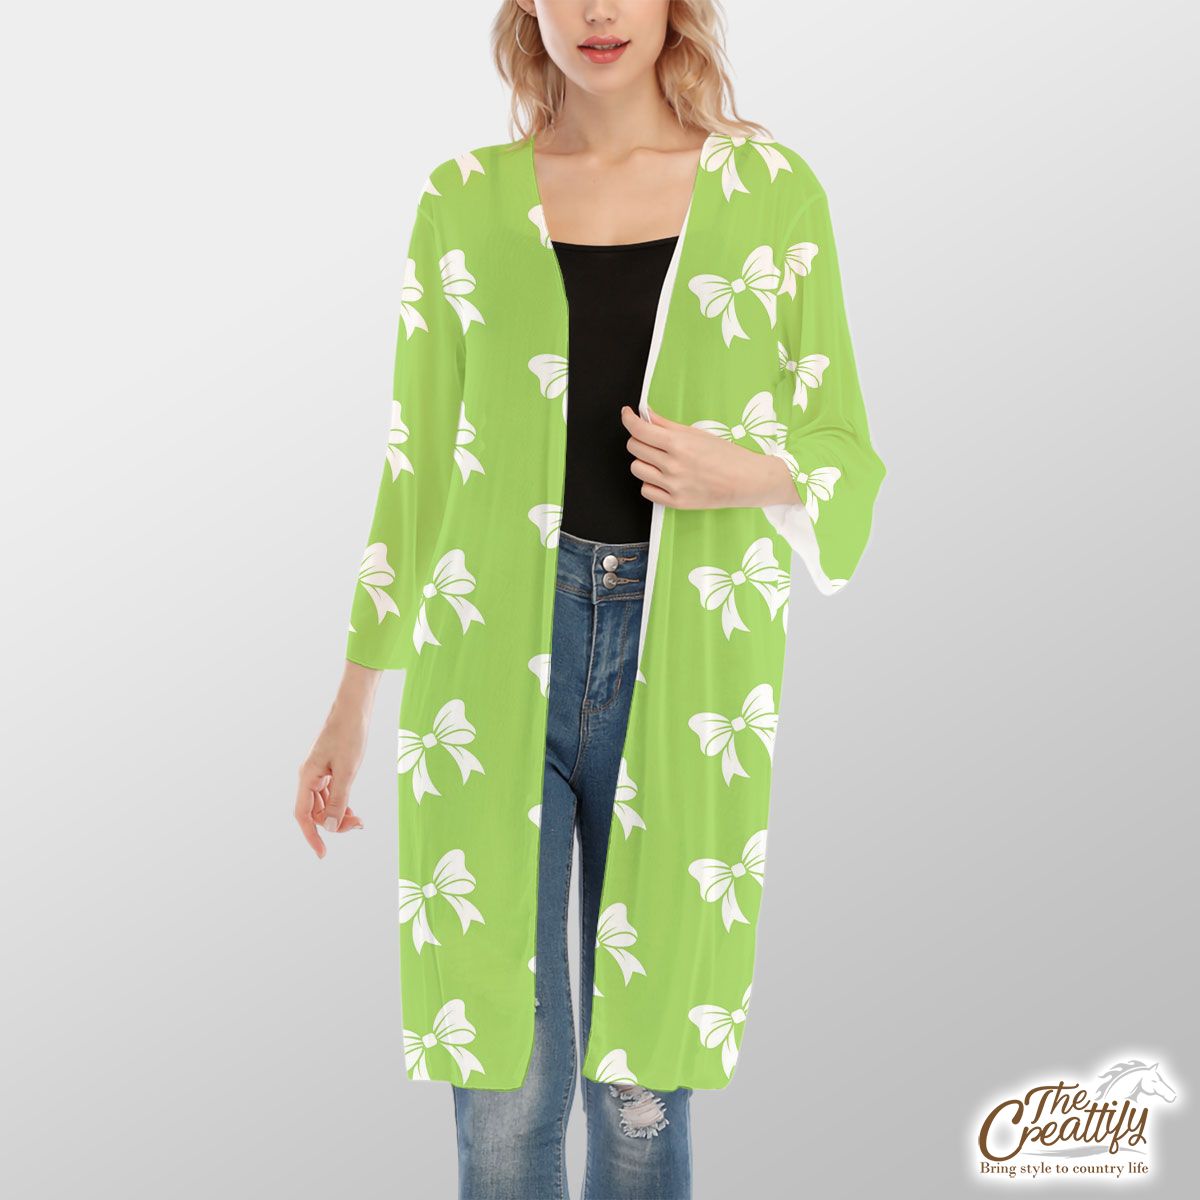 Christmas Bow, Christmas Tree Bows On The Green Background V-Neck Mesh Cardigan